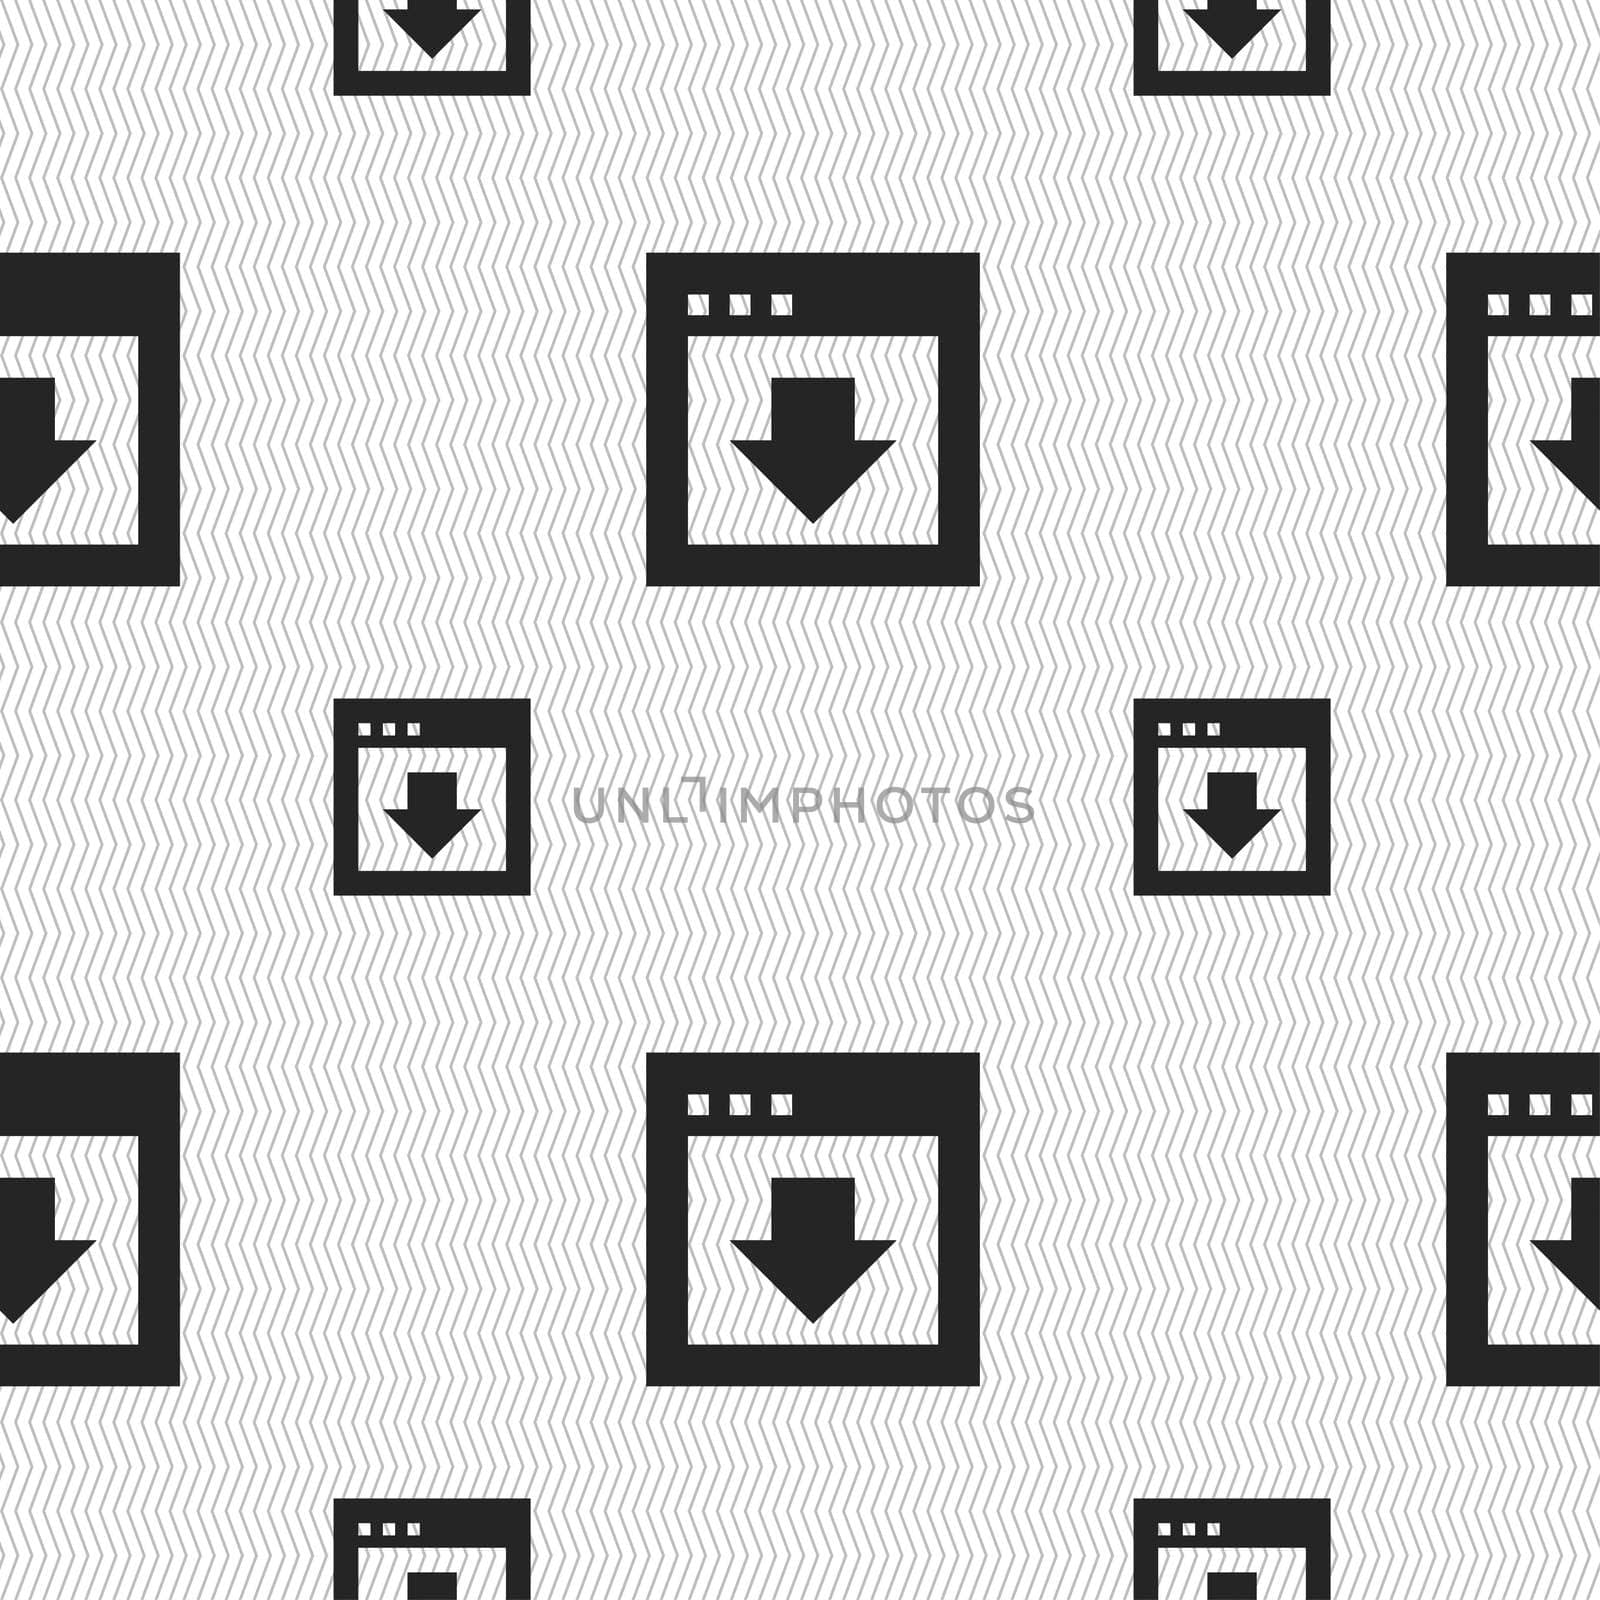 Arrow down, Download, Load, Backup icon sign. Seamless pattern with geometric texture.  by serhii_lohvyniuk